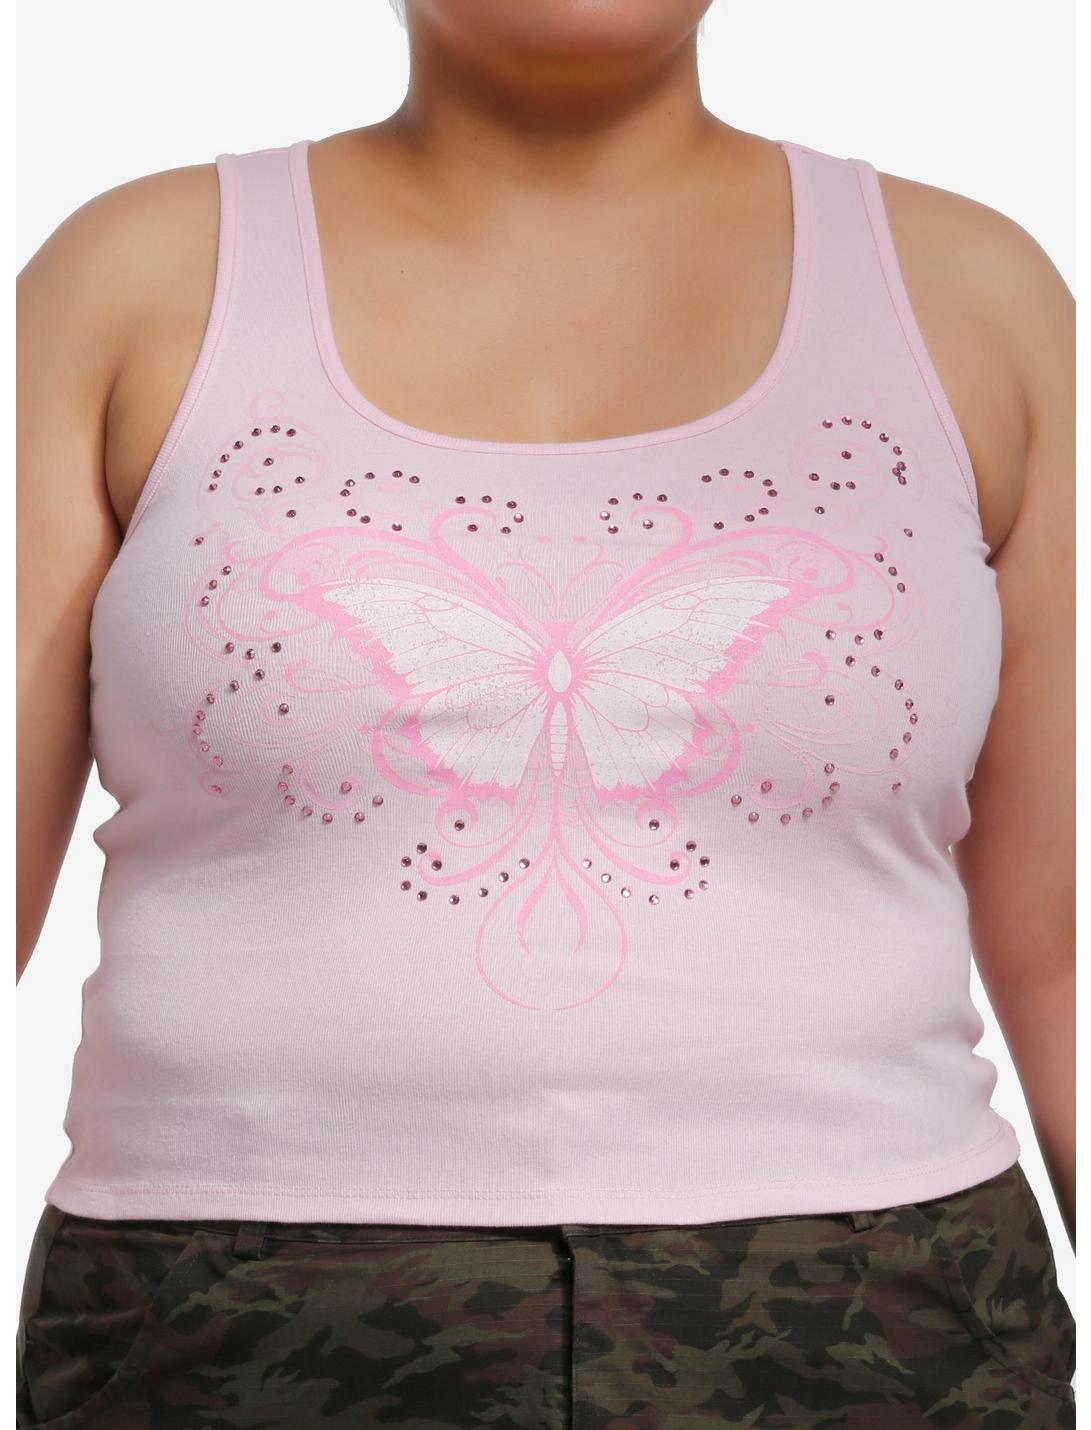 Social Collision Pink Butterfly Rhinestone Girls Racerback Tank Top Plus Size, PINK, hi-res